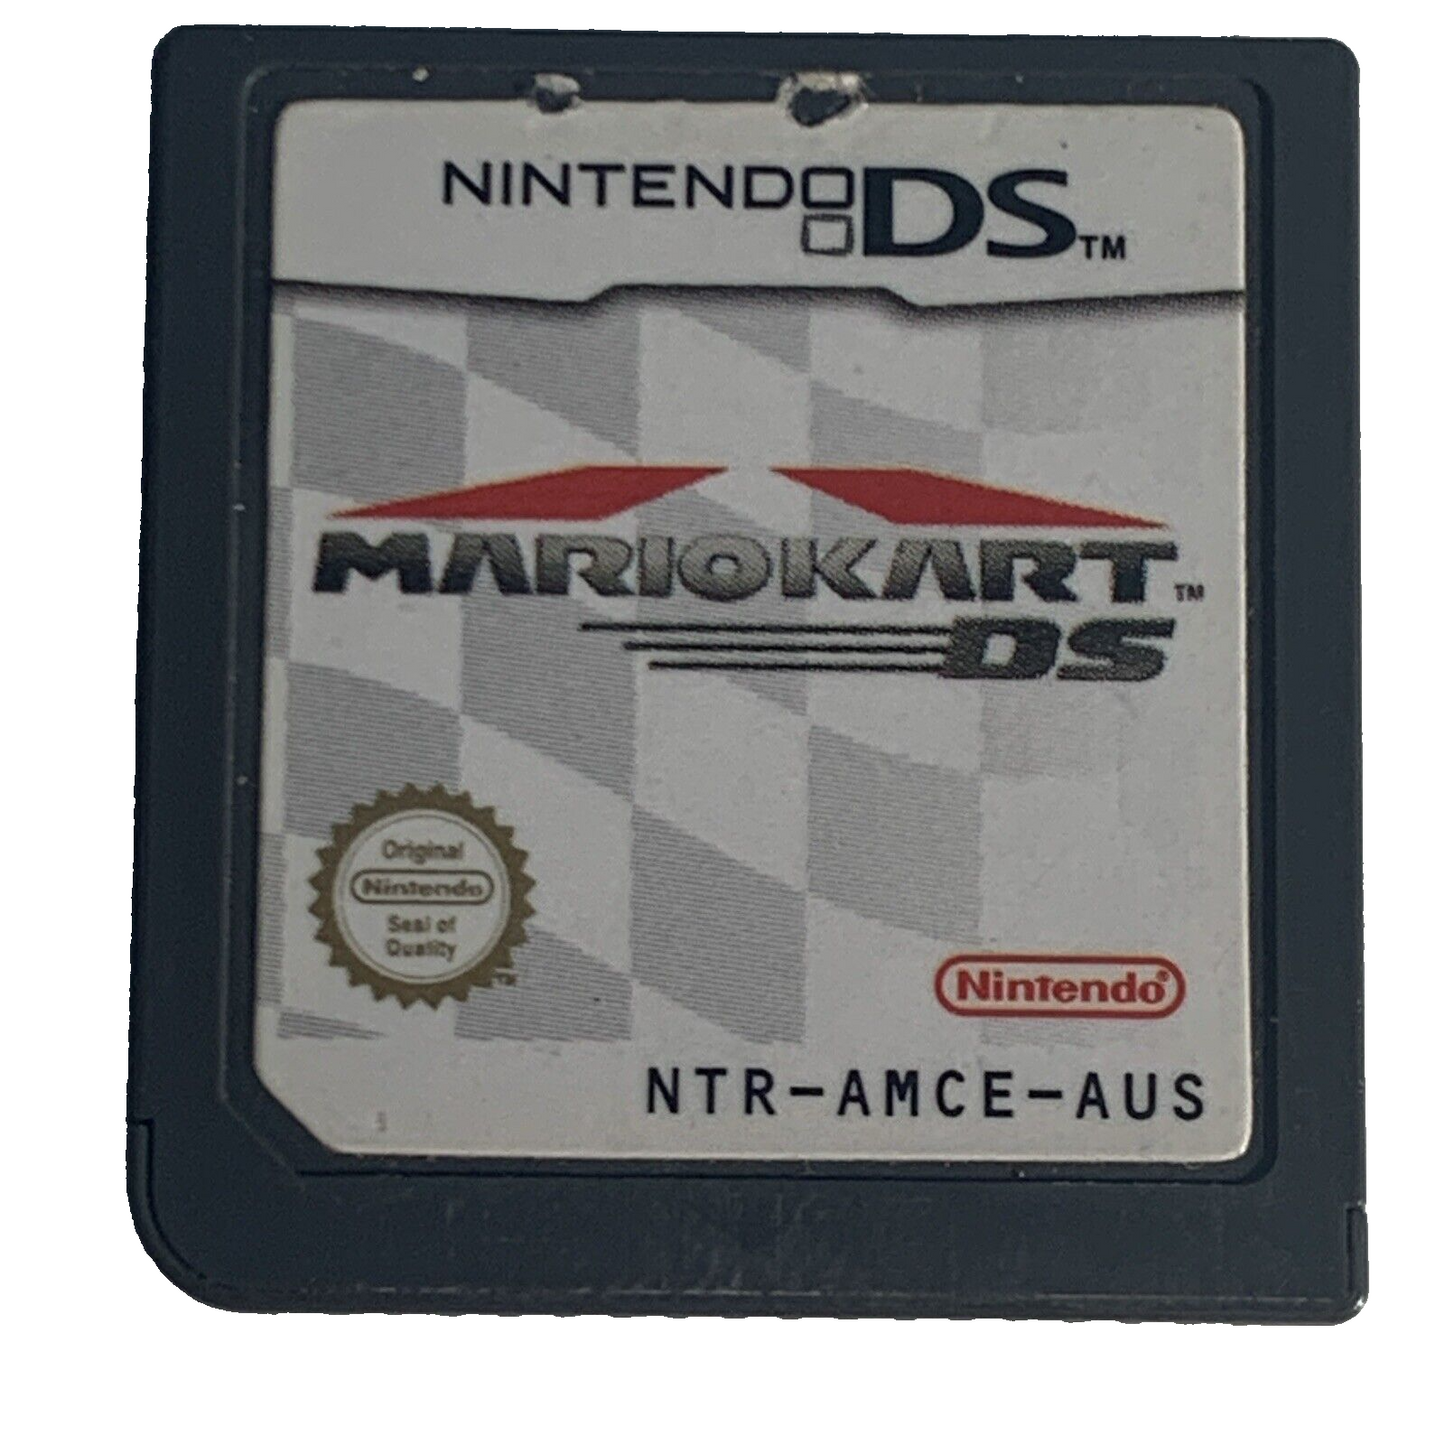 Mario Kart DS Nintendo DS Game Cartridge Only